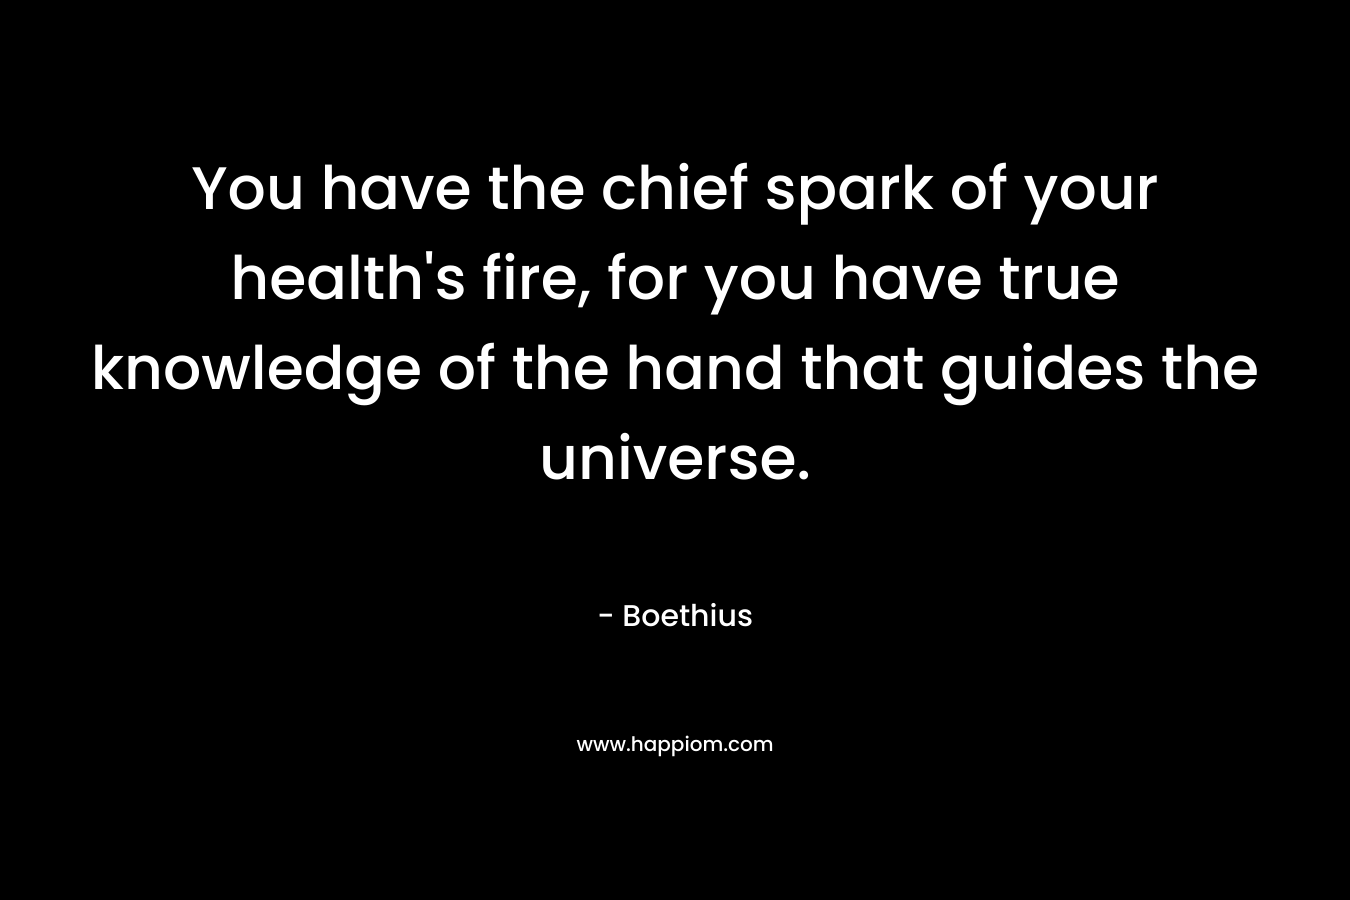 You have the chief spark of your health's fire, for you have true knowledge of the hand that guides the universe.